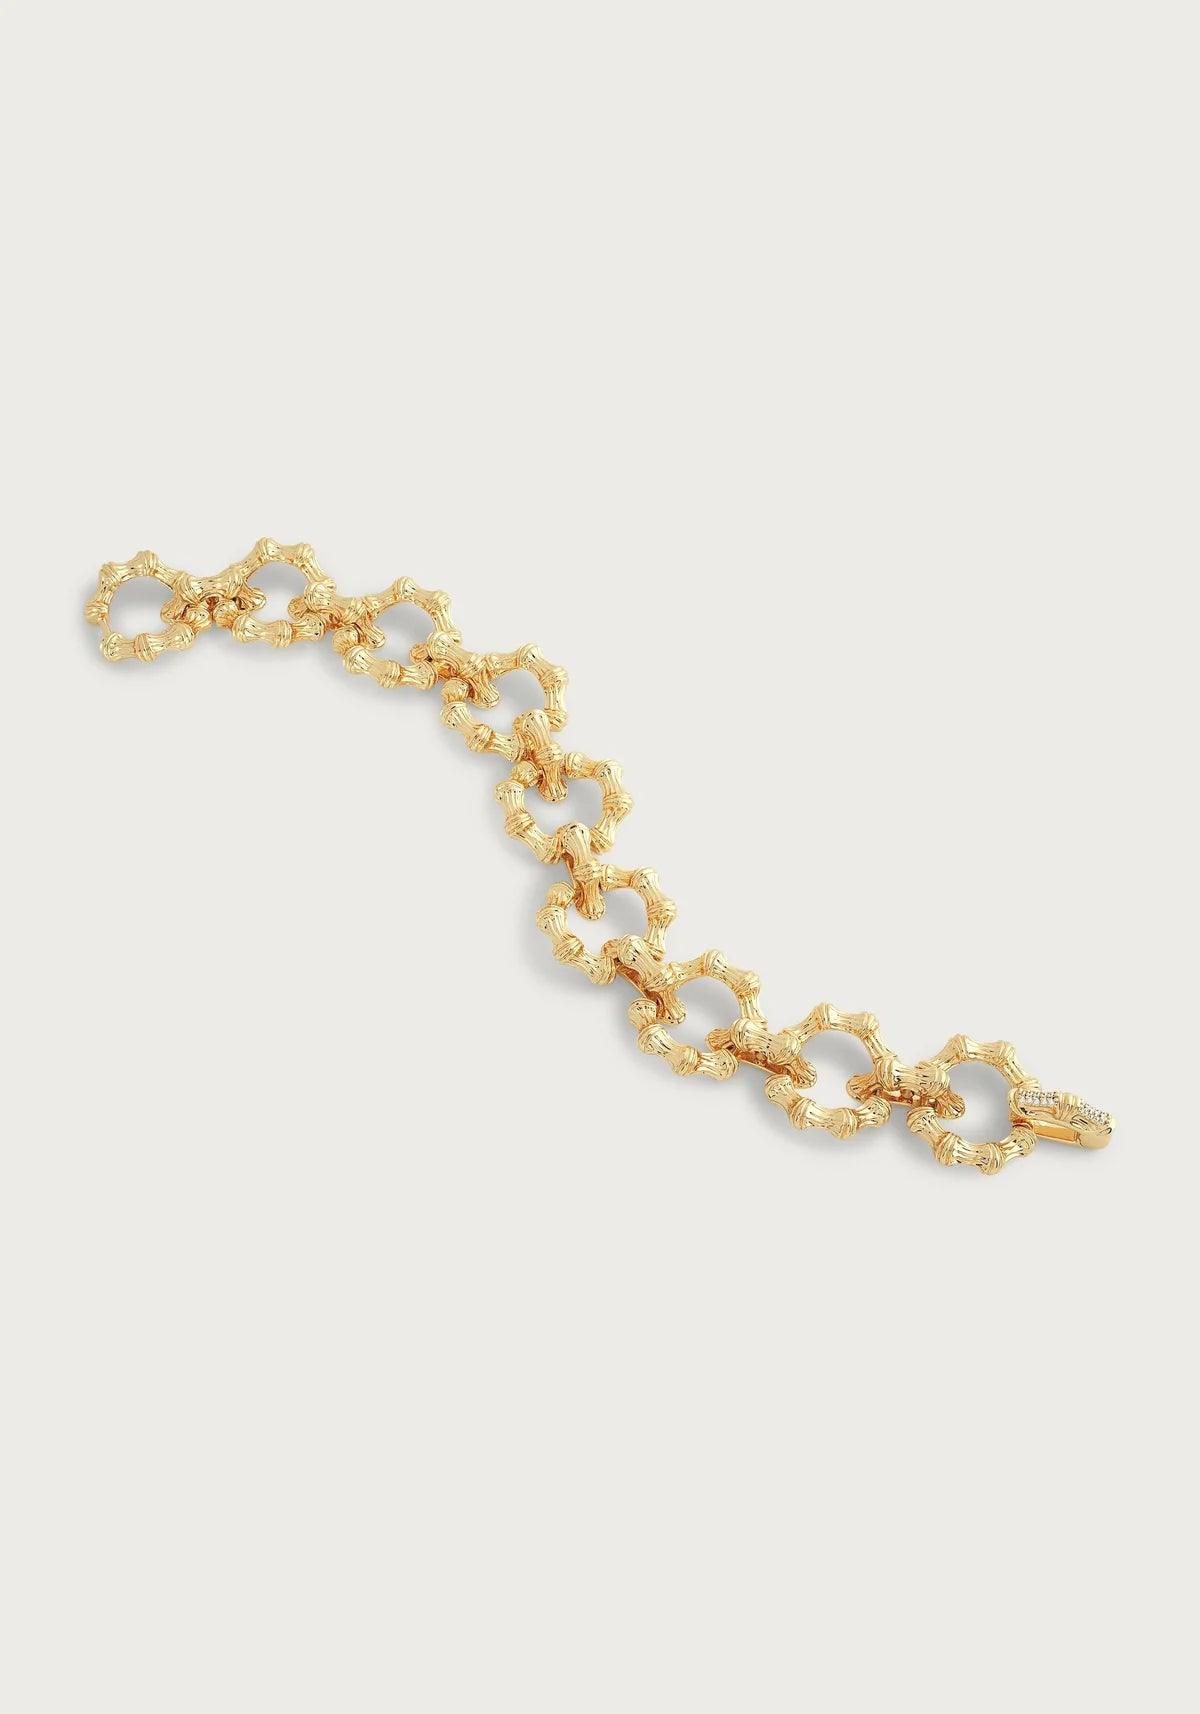 Bamboo Chain Bracelet - BTK COLLECTION